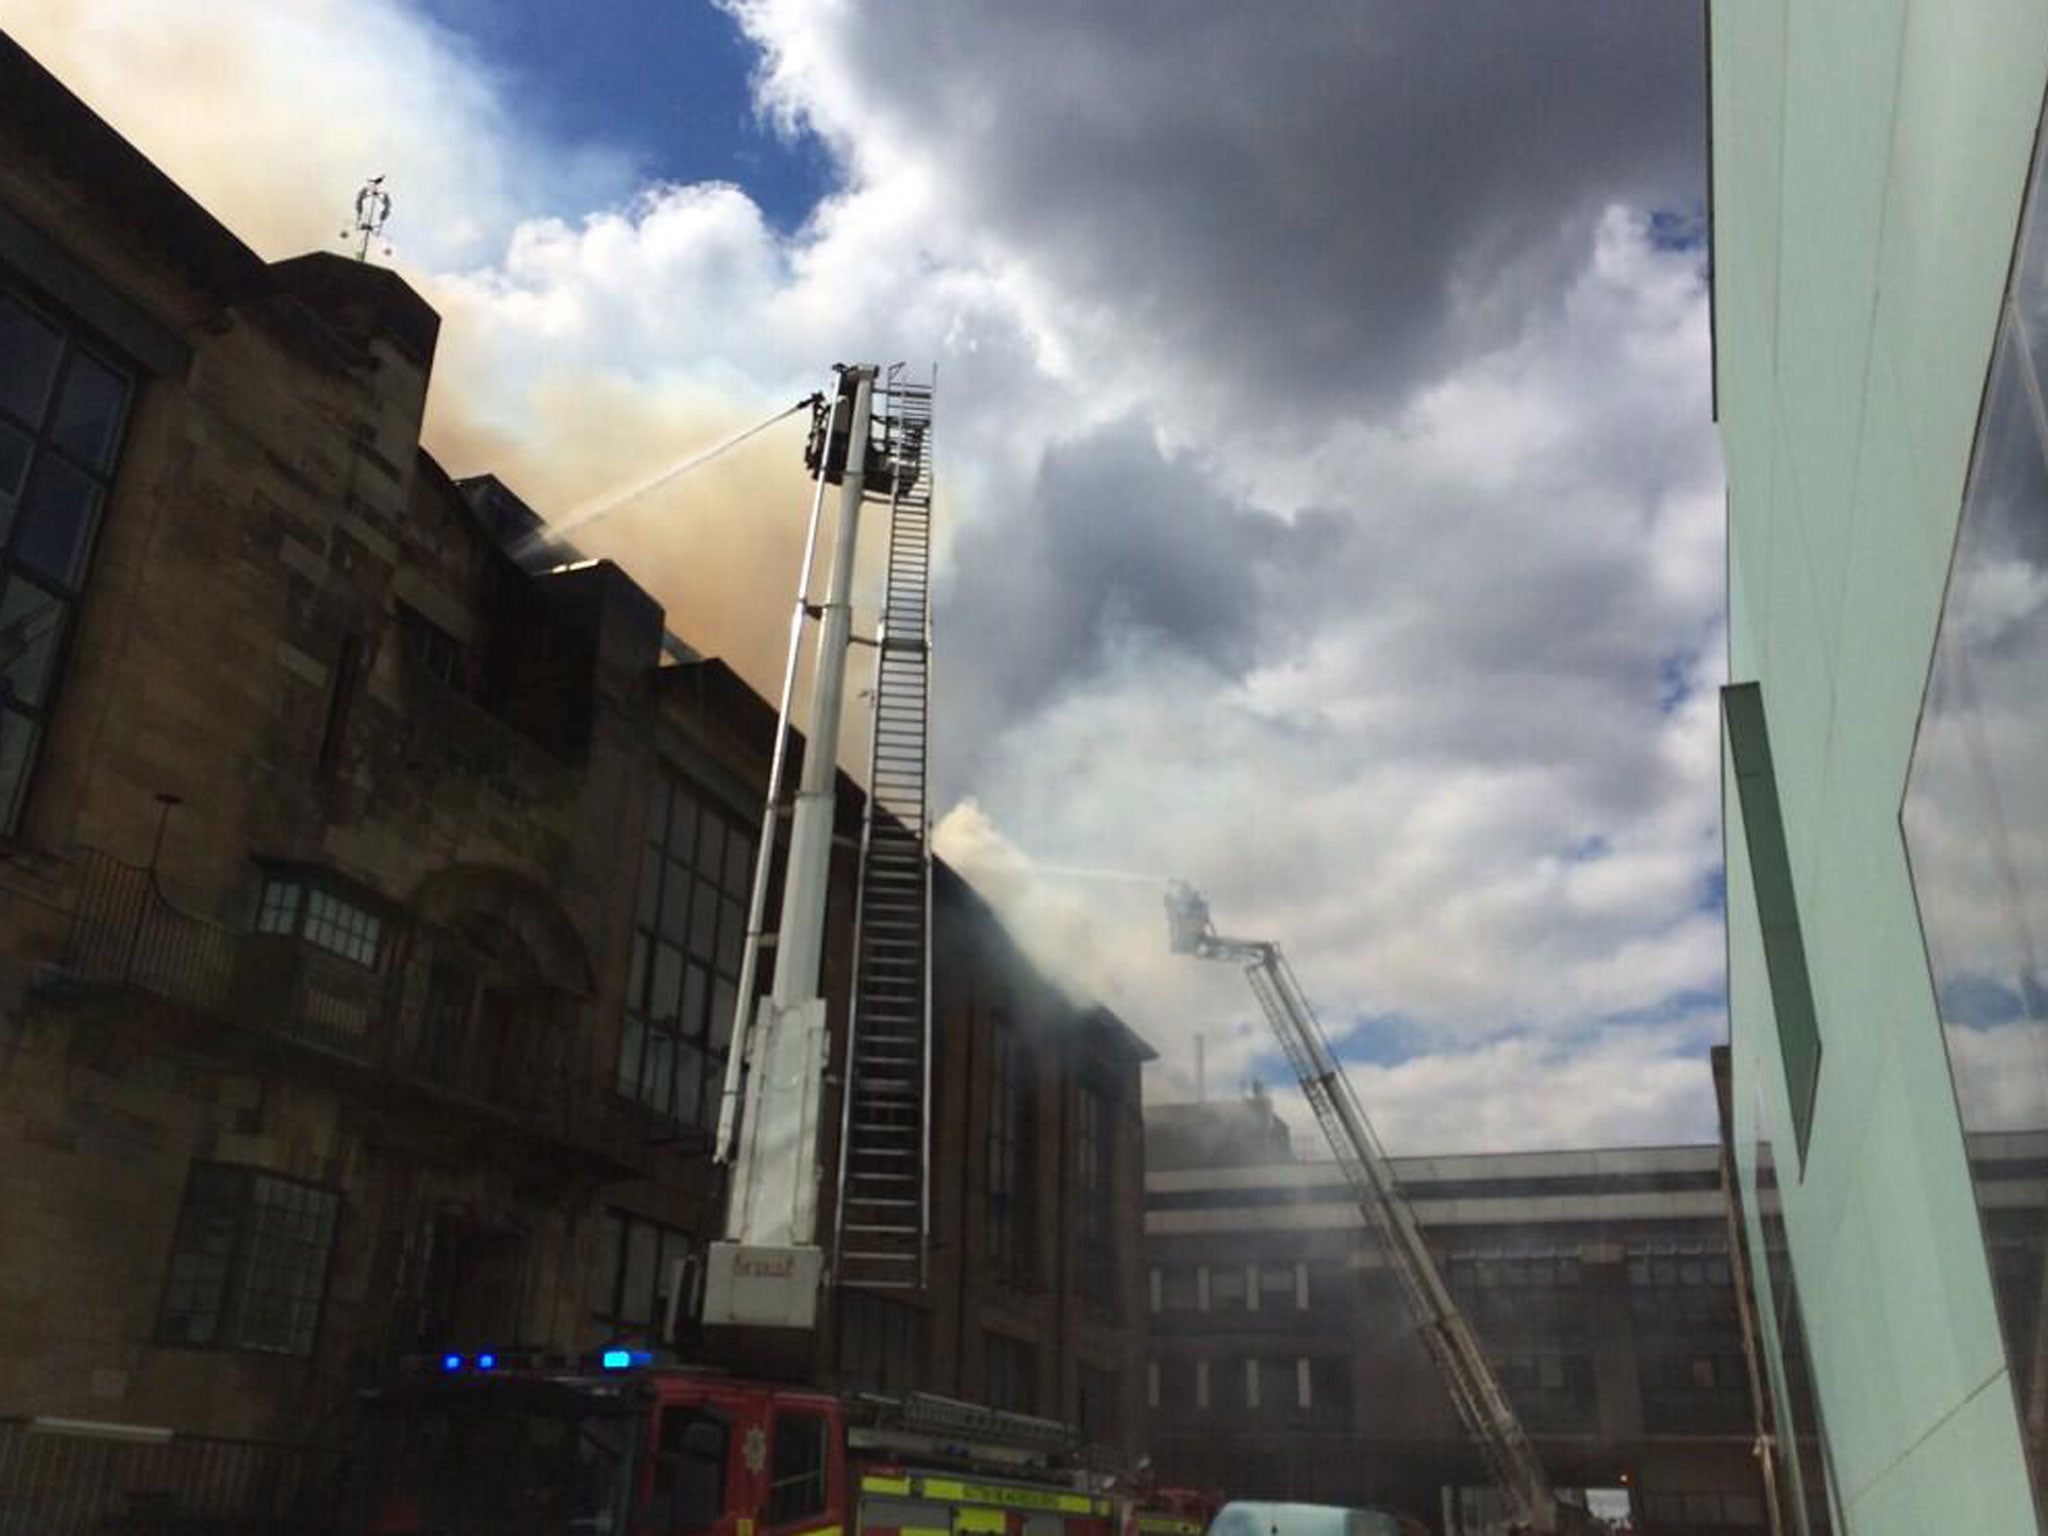 Fire crew tackling the blaze at the Glasgow School of Art